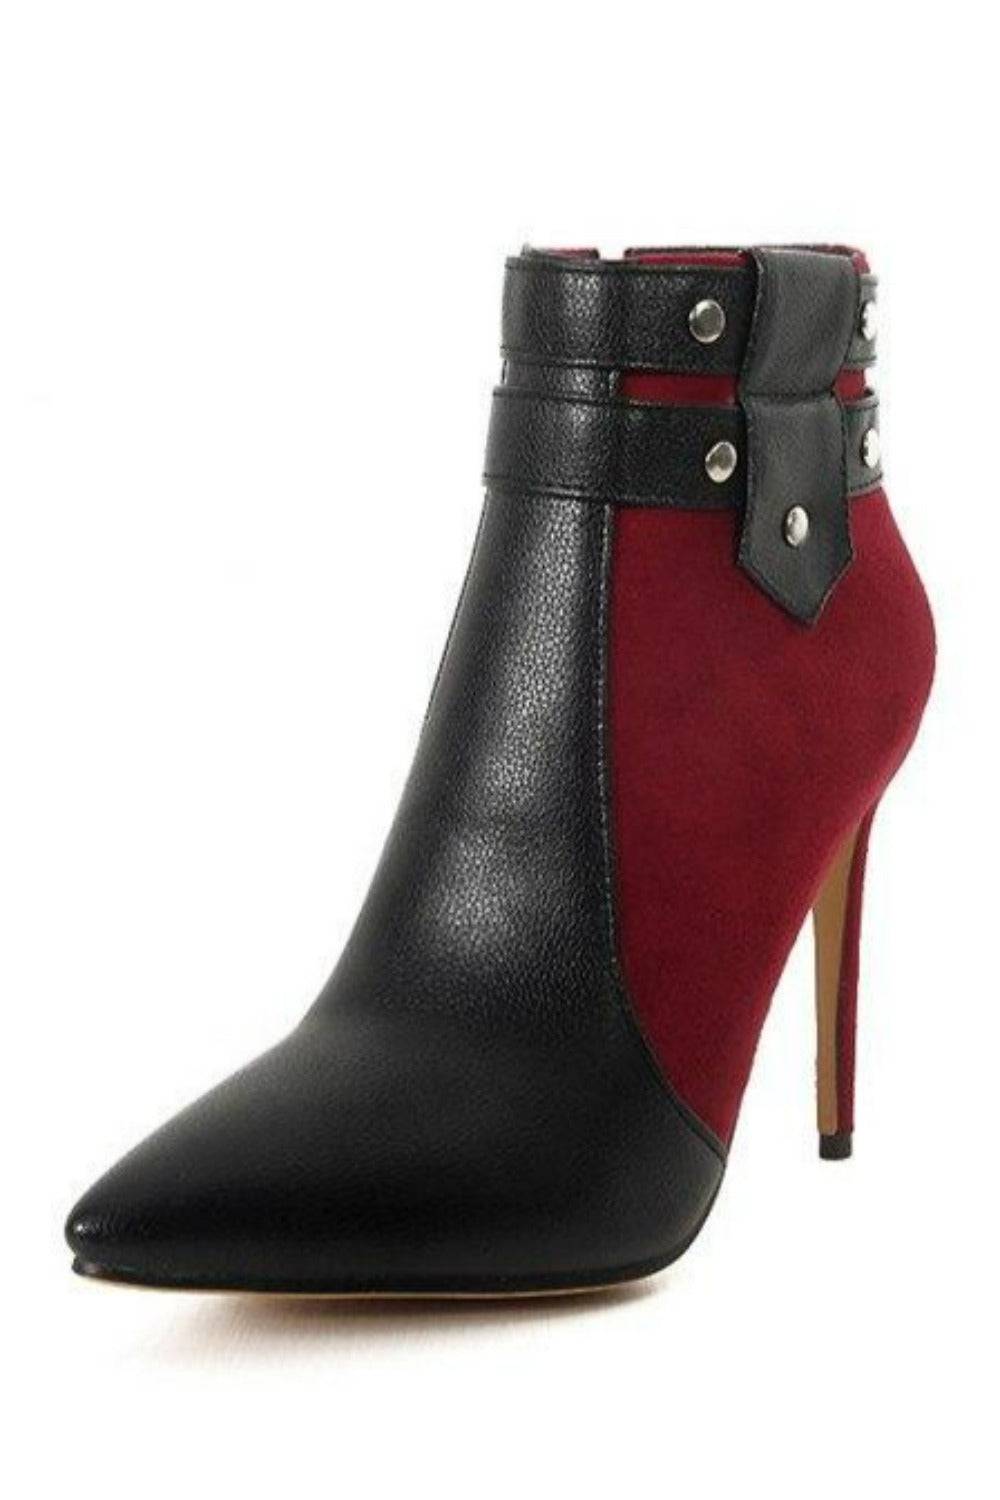 Stiletto High Heels Buckle Ankle Boots  - TGC Boutique - Ankle Booties